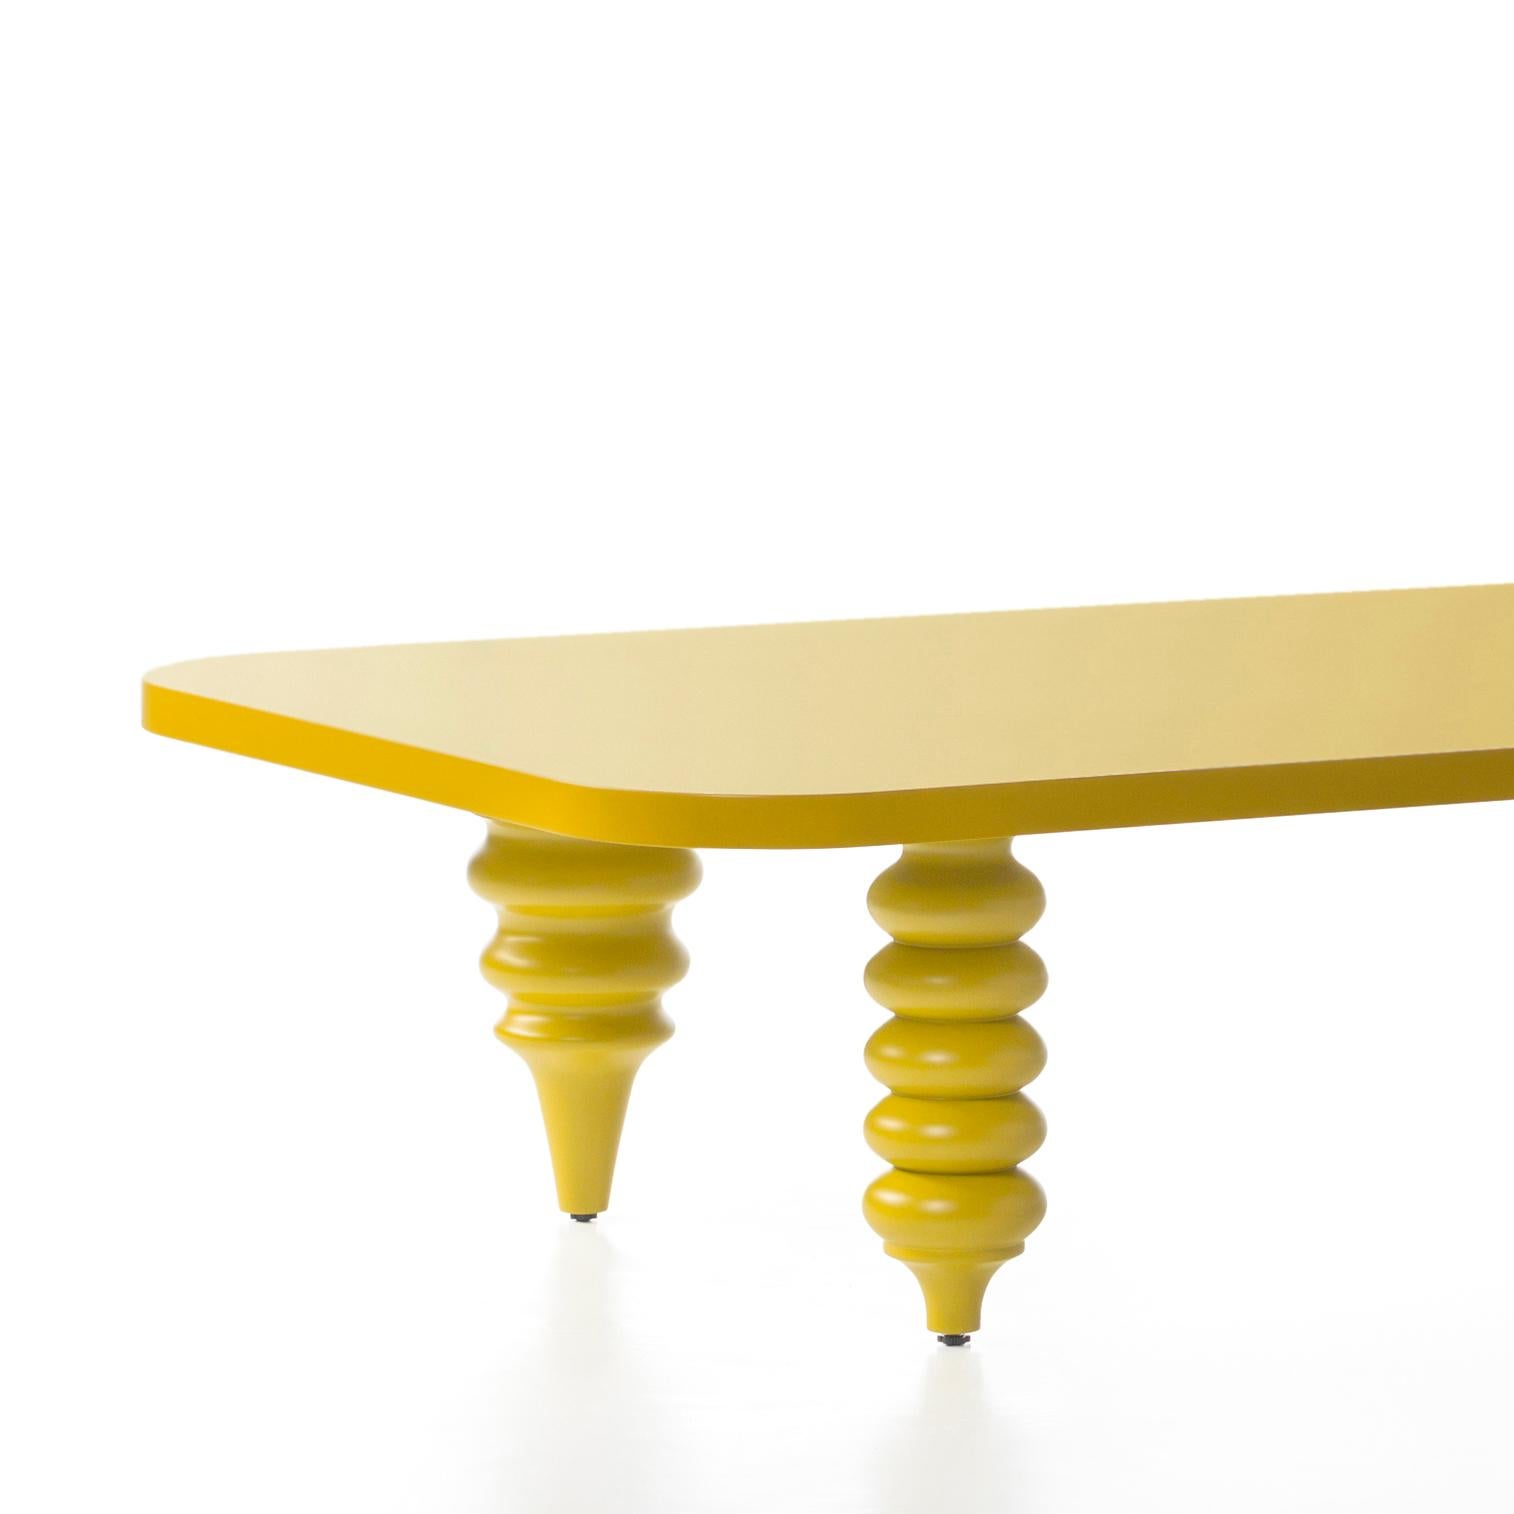 Low table designed by Jaime Hayon manufactured in Barcelona by BD.

MDF base and legs in turned solid alder wood, lacquered in yellow.

Measures: 50 x 150 x H 35 cm.